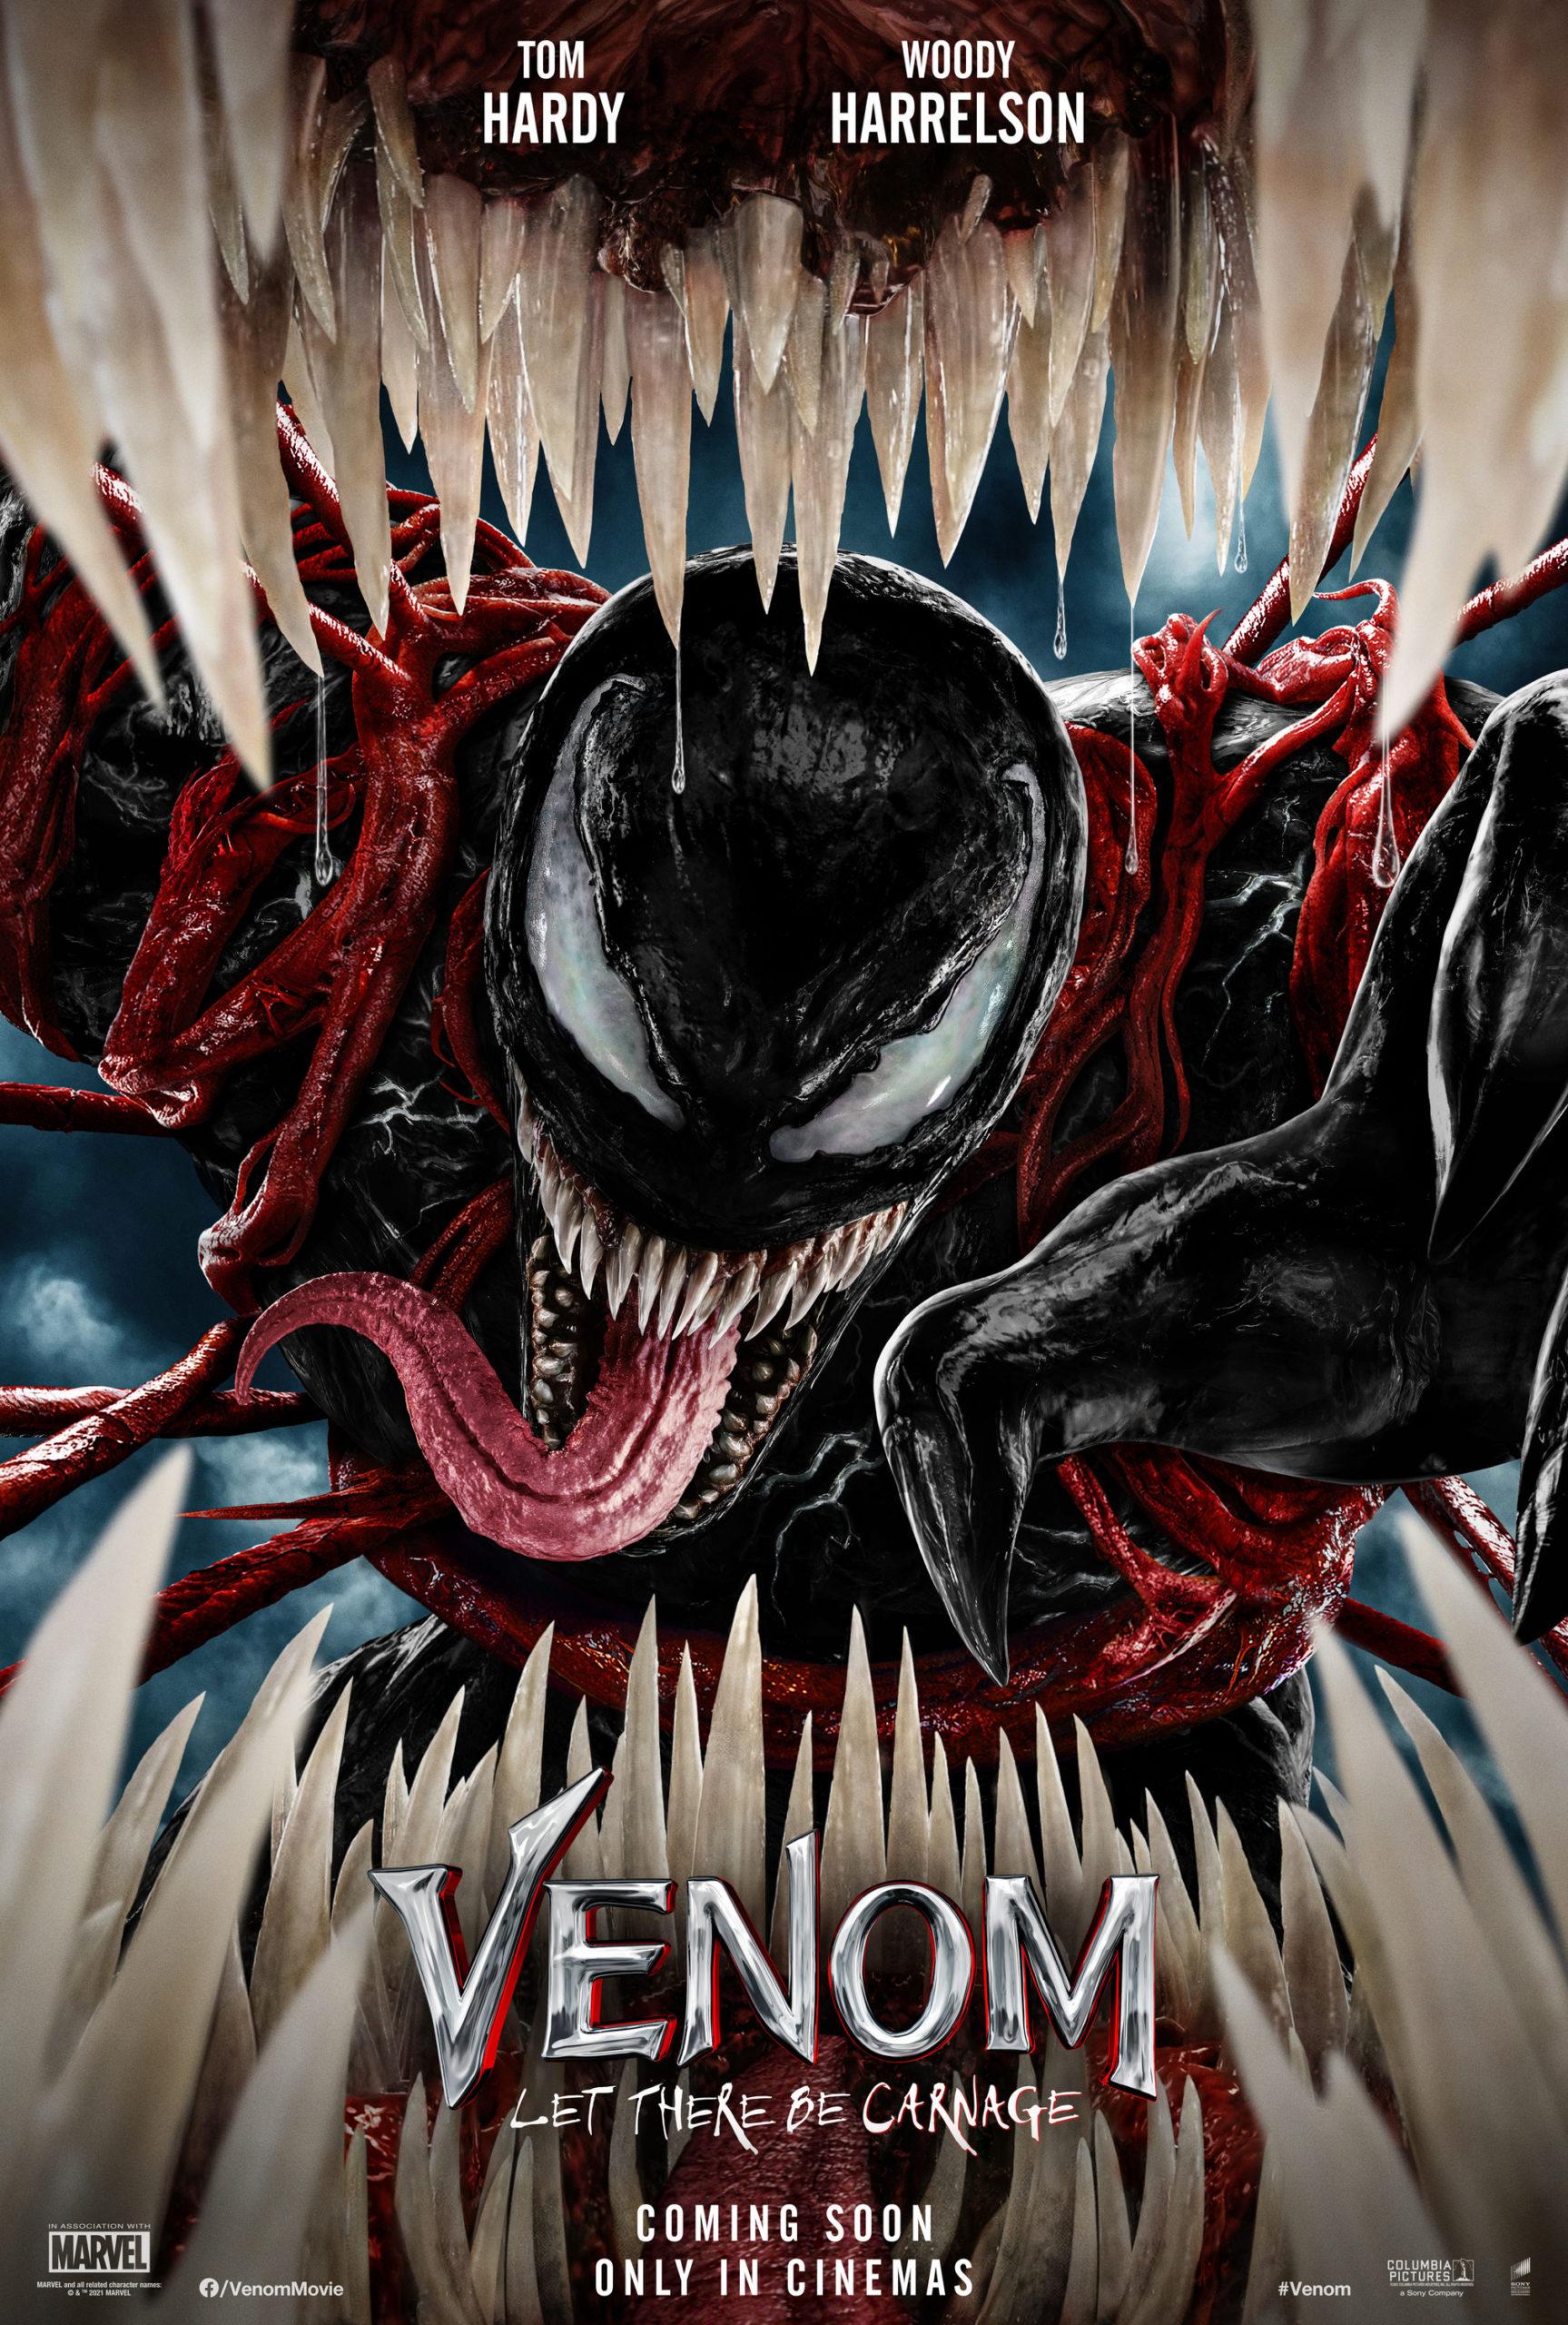 1st Trailer For 'Venom​: Let There Be Carnage' Movie Starring Tom Hardy & Woody Harrelson